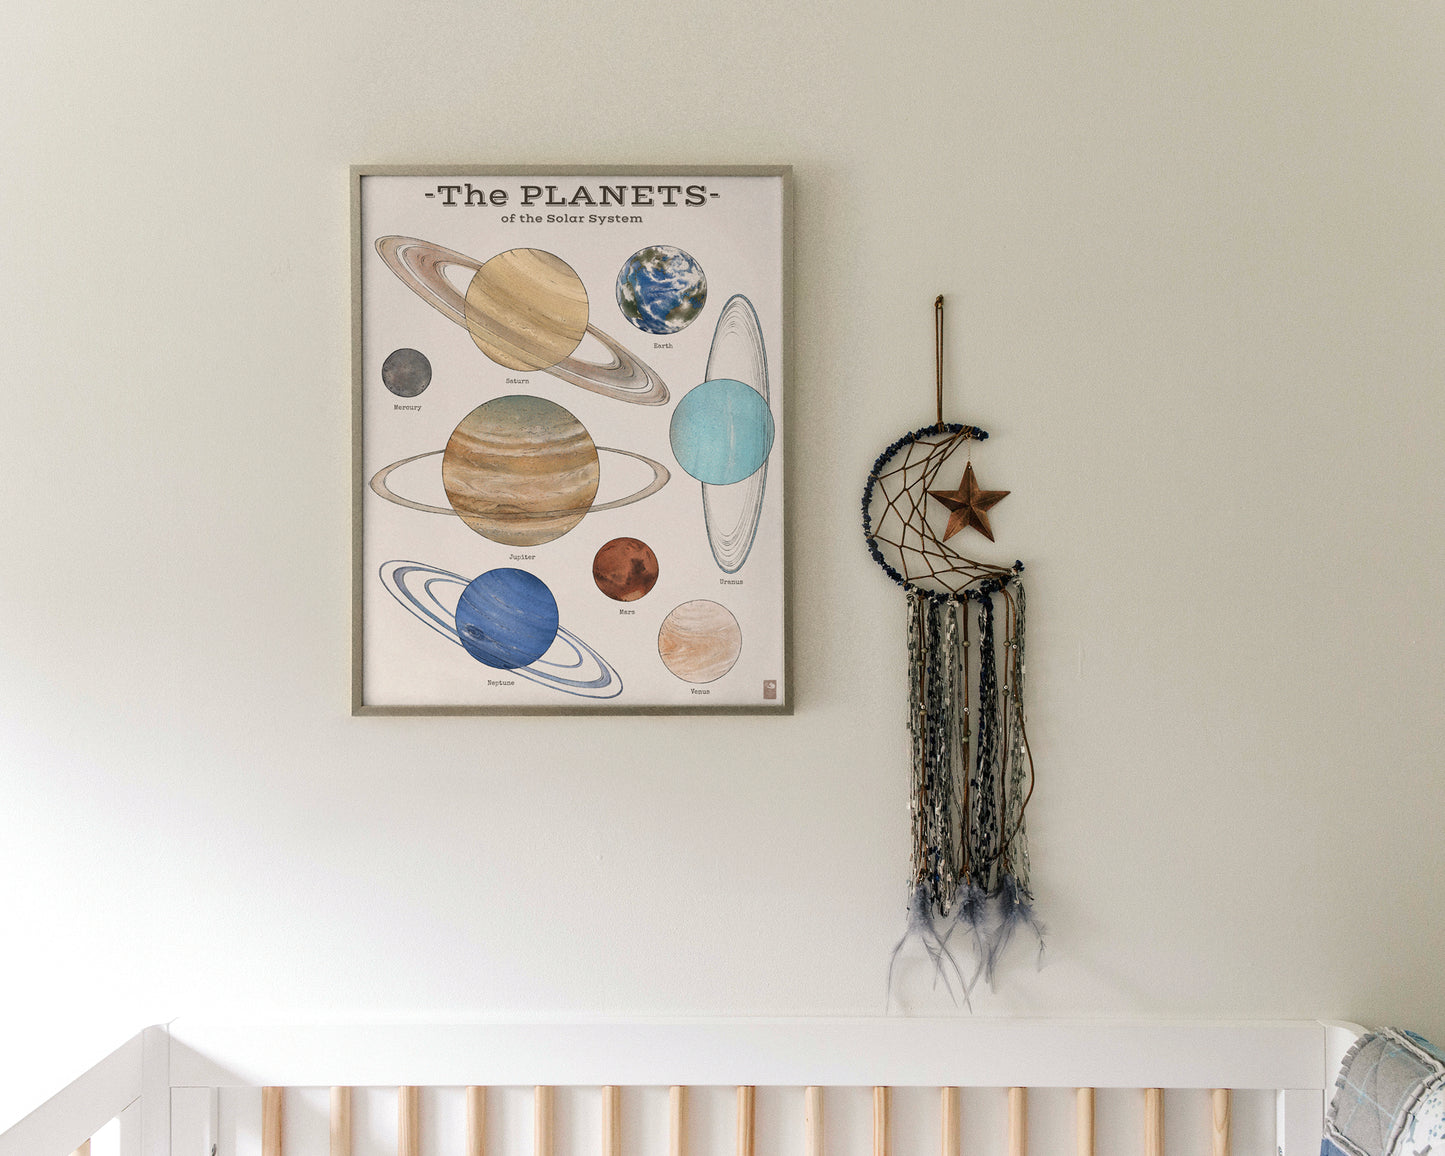 "The Planets" by Catherine Hébert - Solar System Planet Chart Giclee Art Print